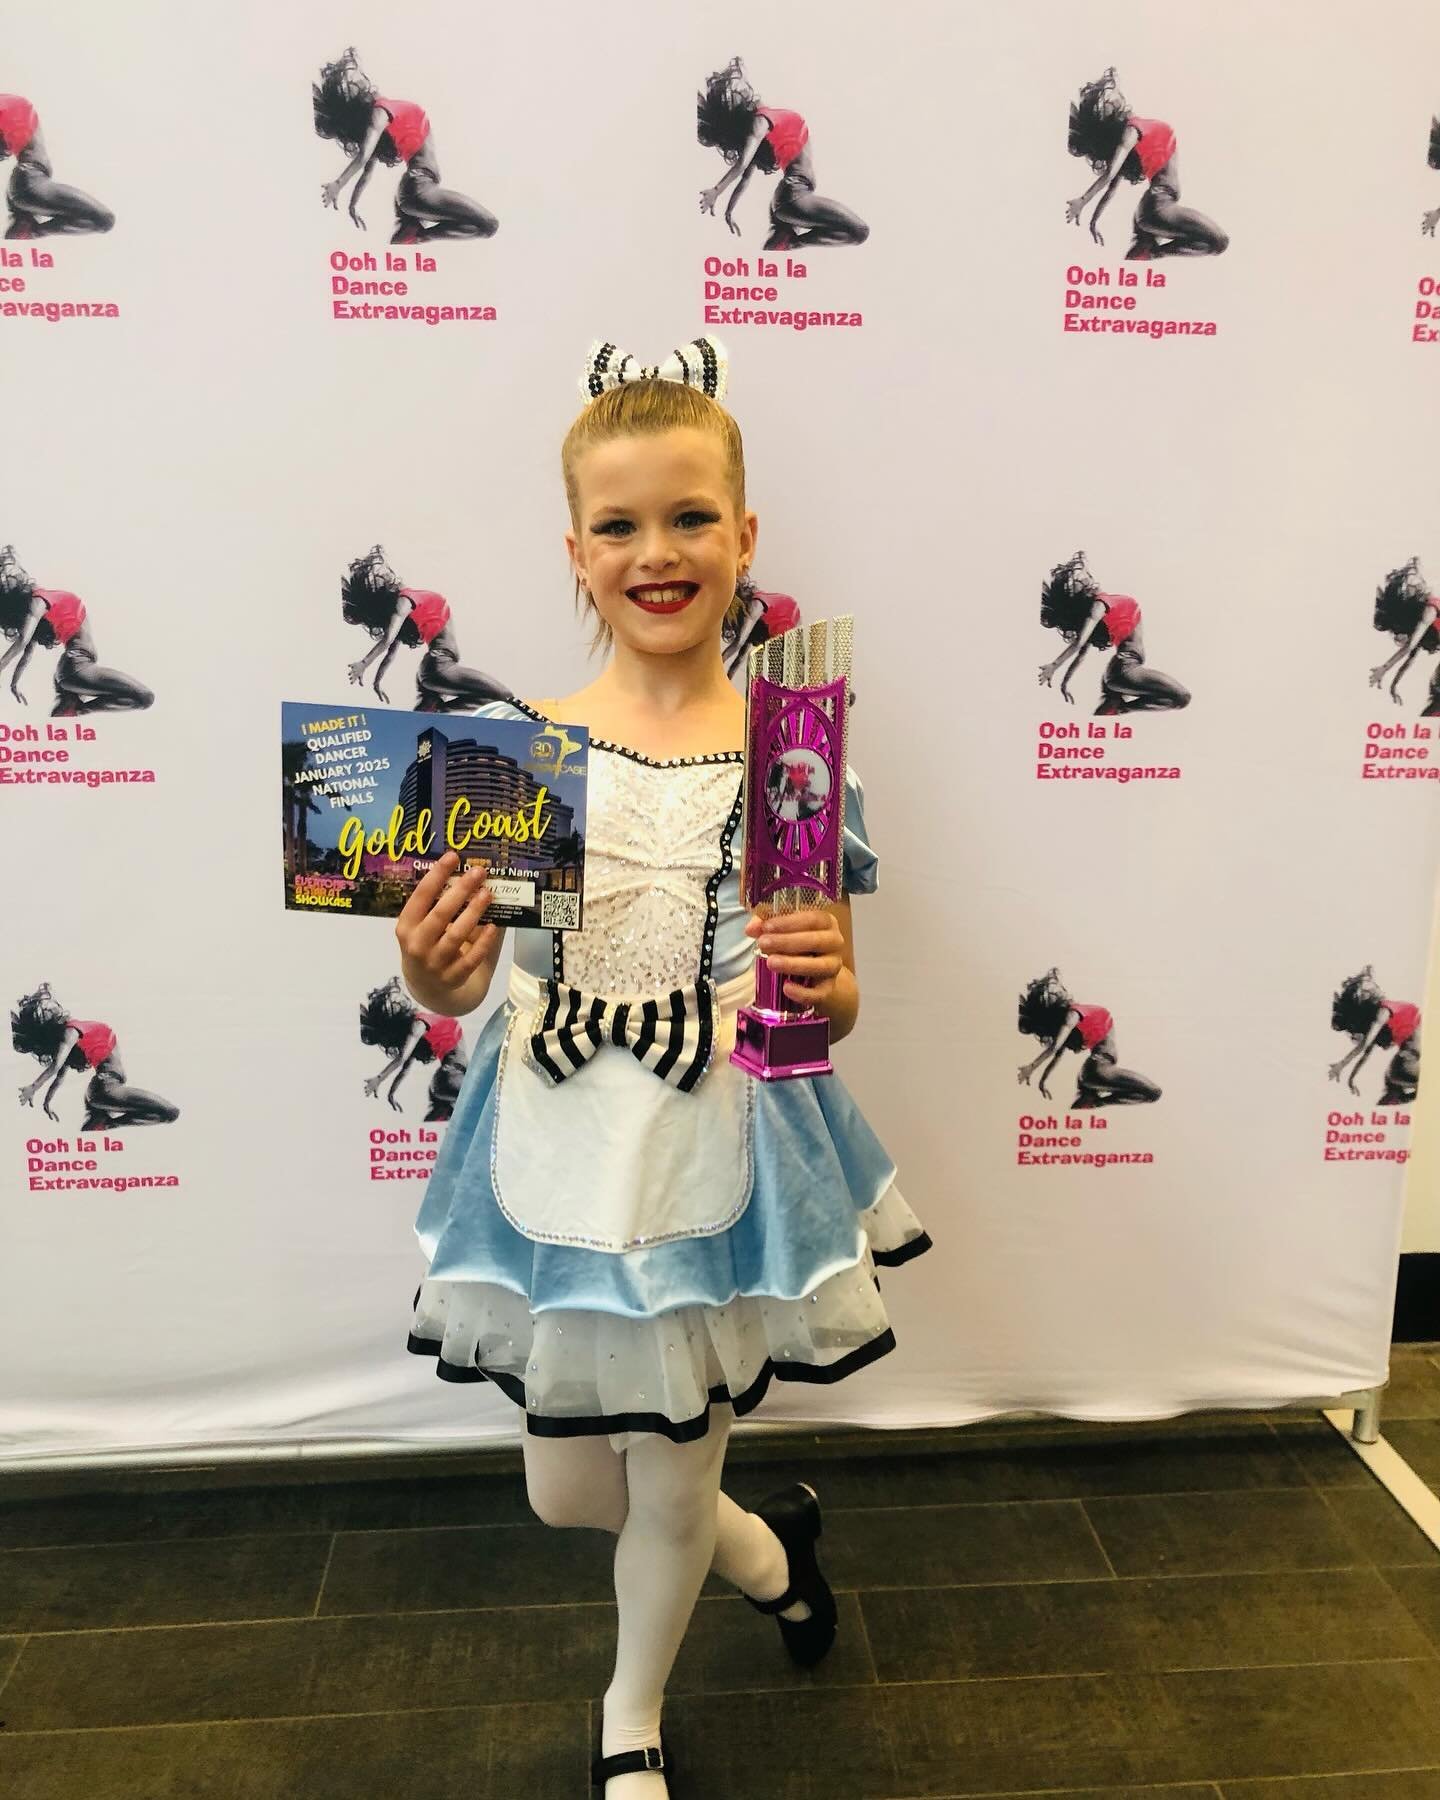 It was Miss Kovi&rsquo;s turn at @ooh_la_la_dance_extravaganza today and what a day it was! 
Congratulations on your results Kovi, we are so proud of you 🩵

🥇 Jazz
🥇 Tap
🥇 Contemporary 
🥈 Lyrical